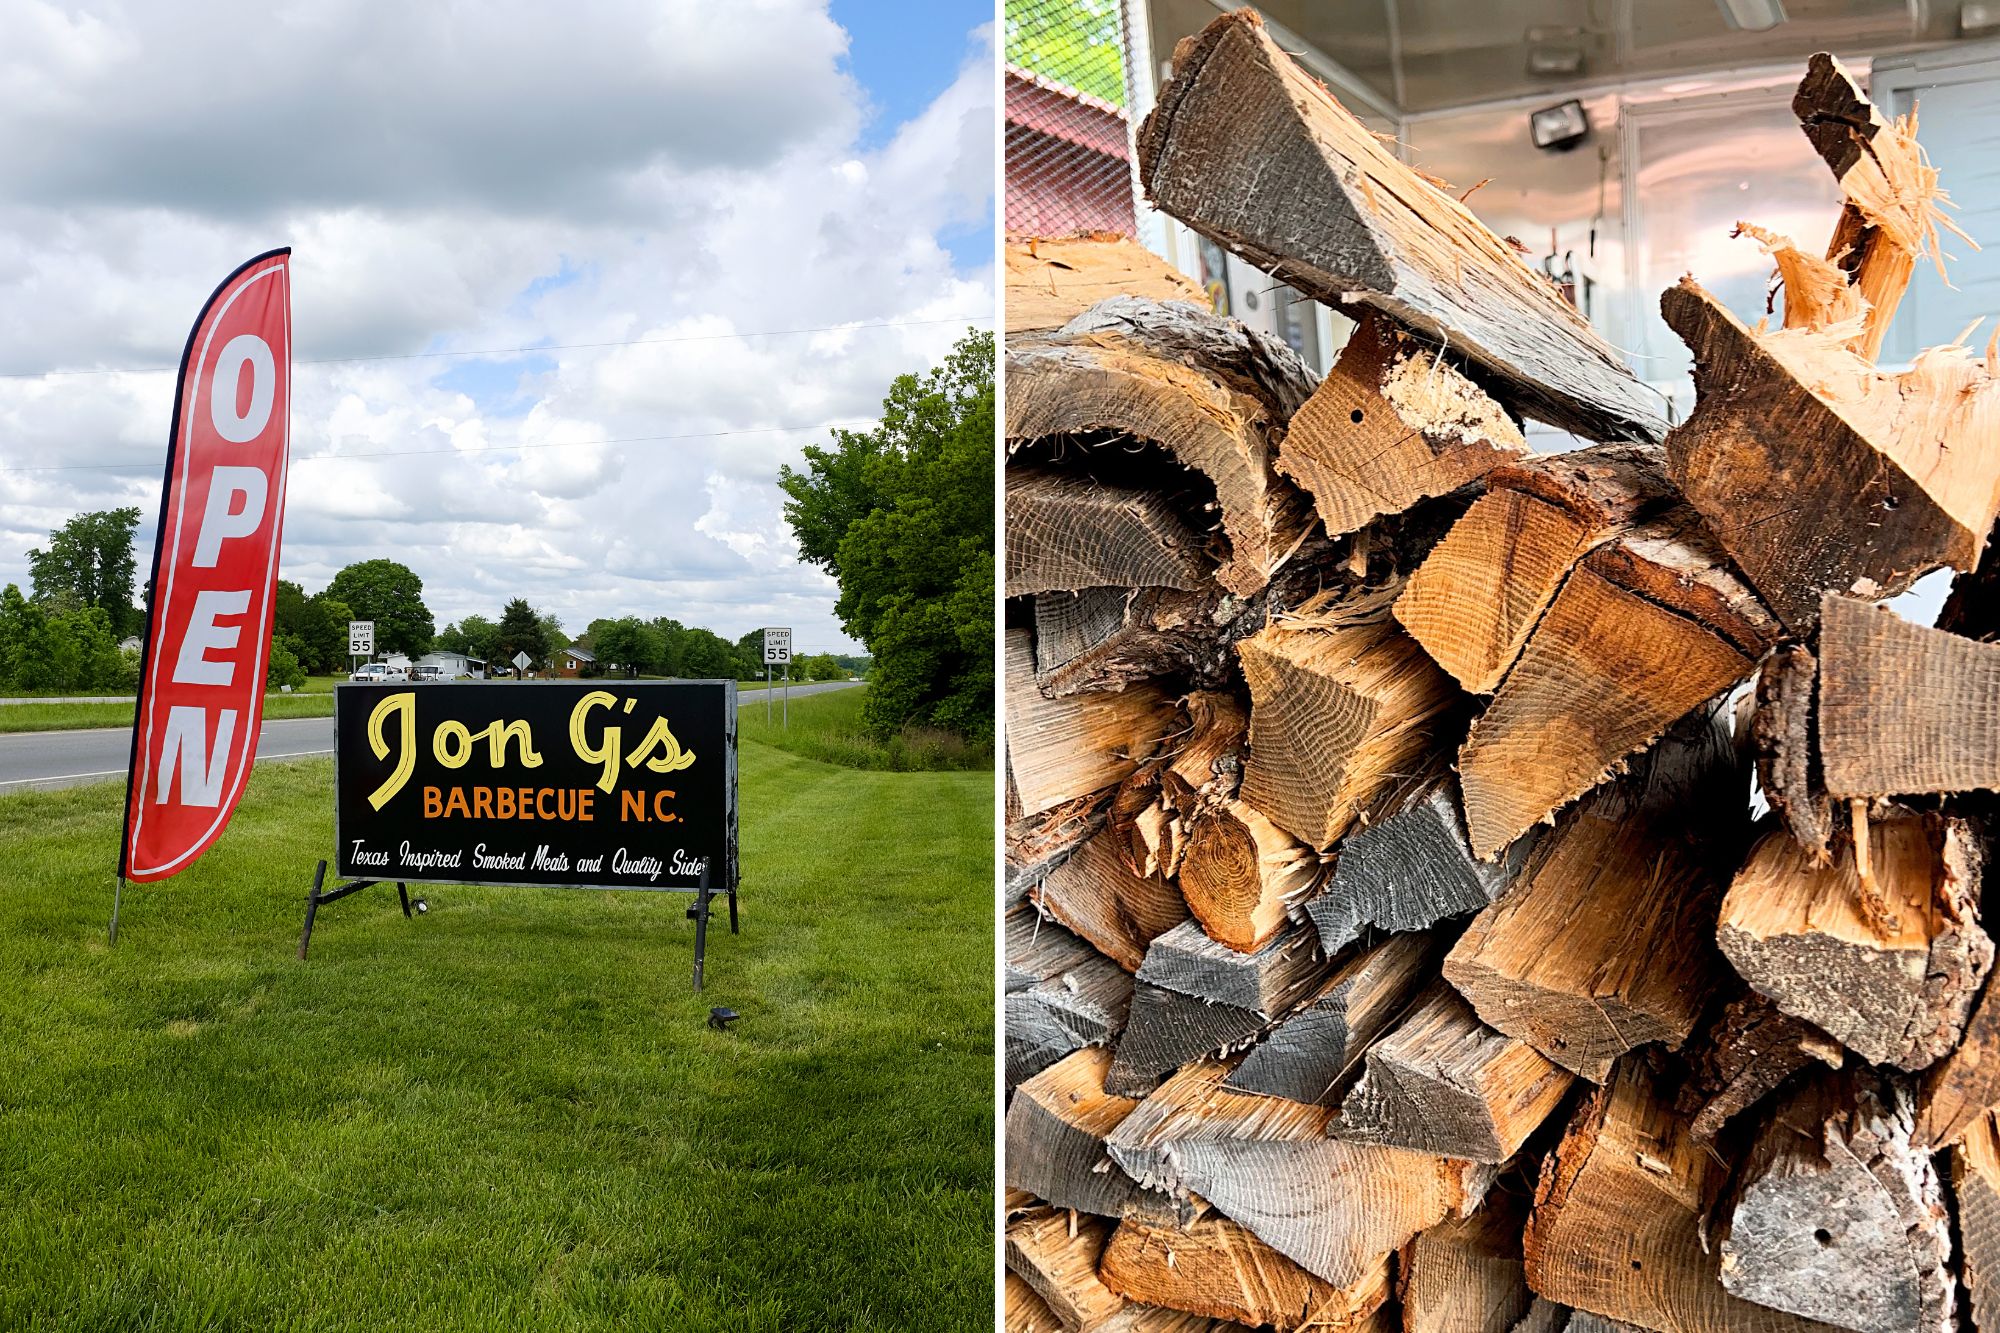 Two images: the Jon G's sign, and a stack of firewood